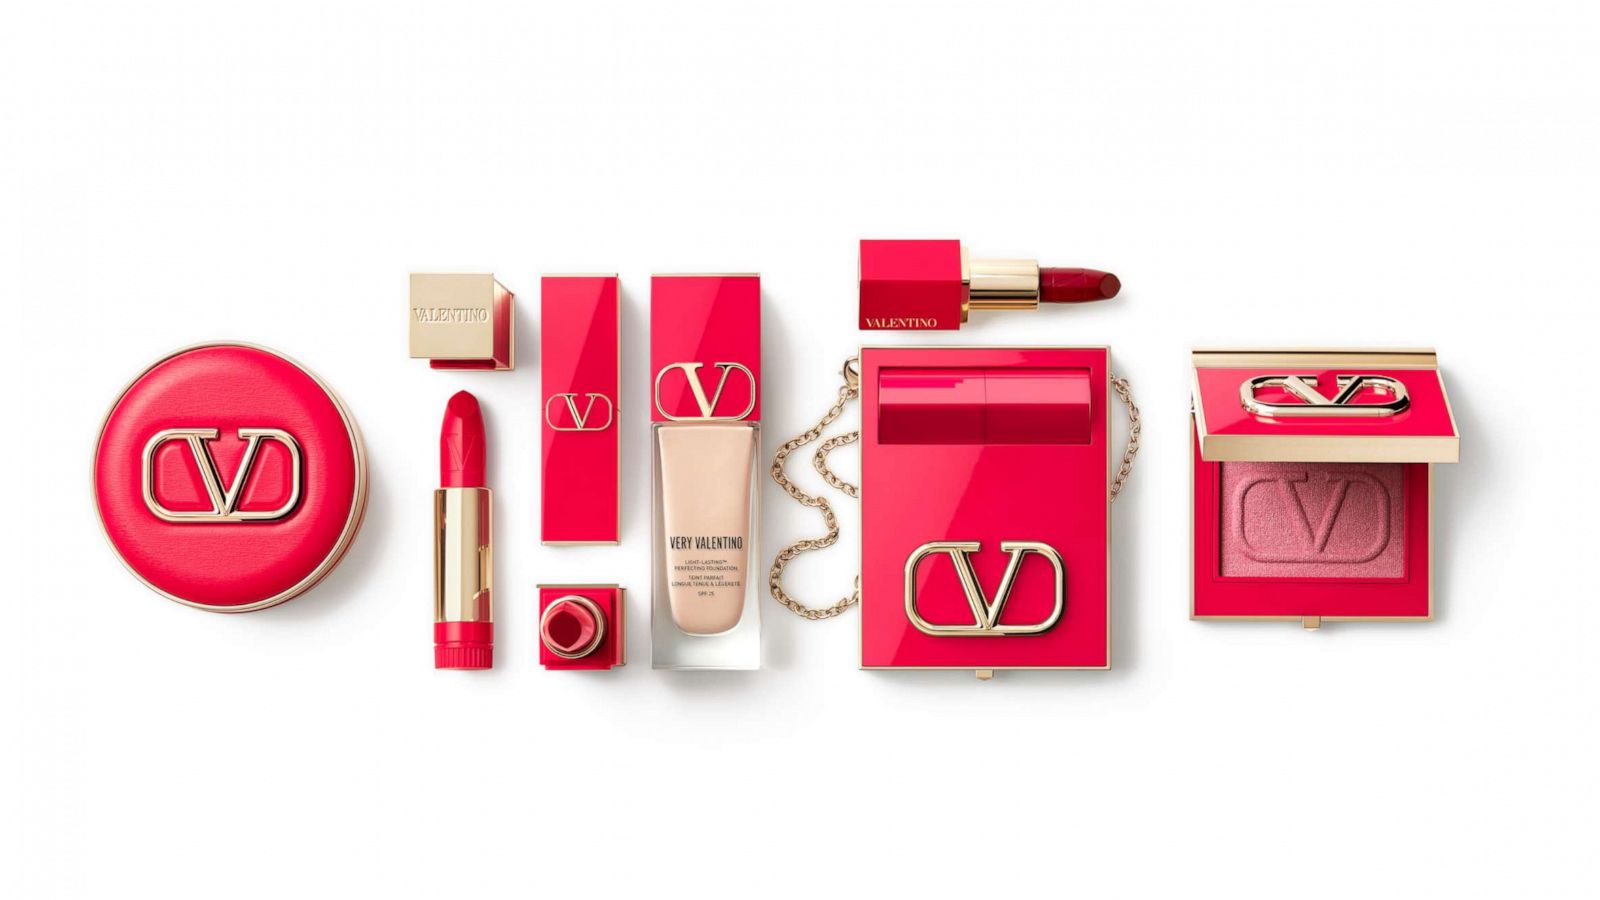 Valentino announces launch of 1st makeup line - Good Morning